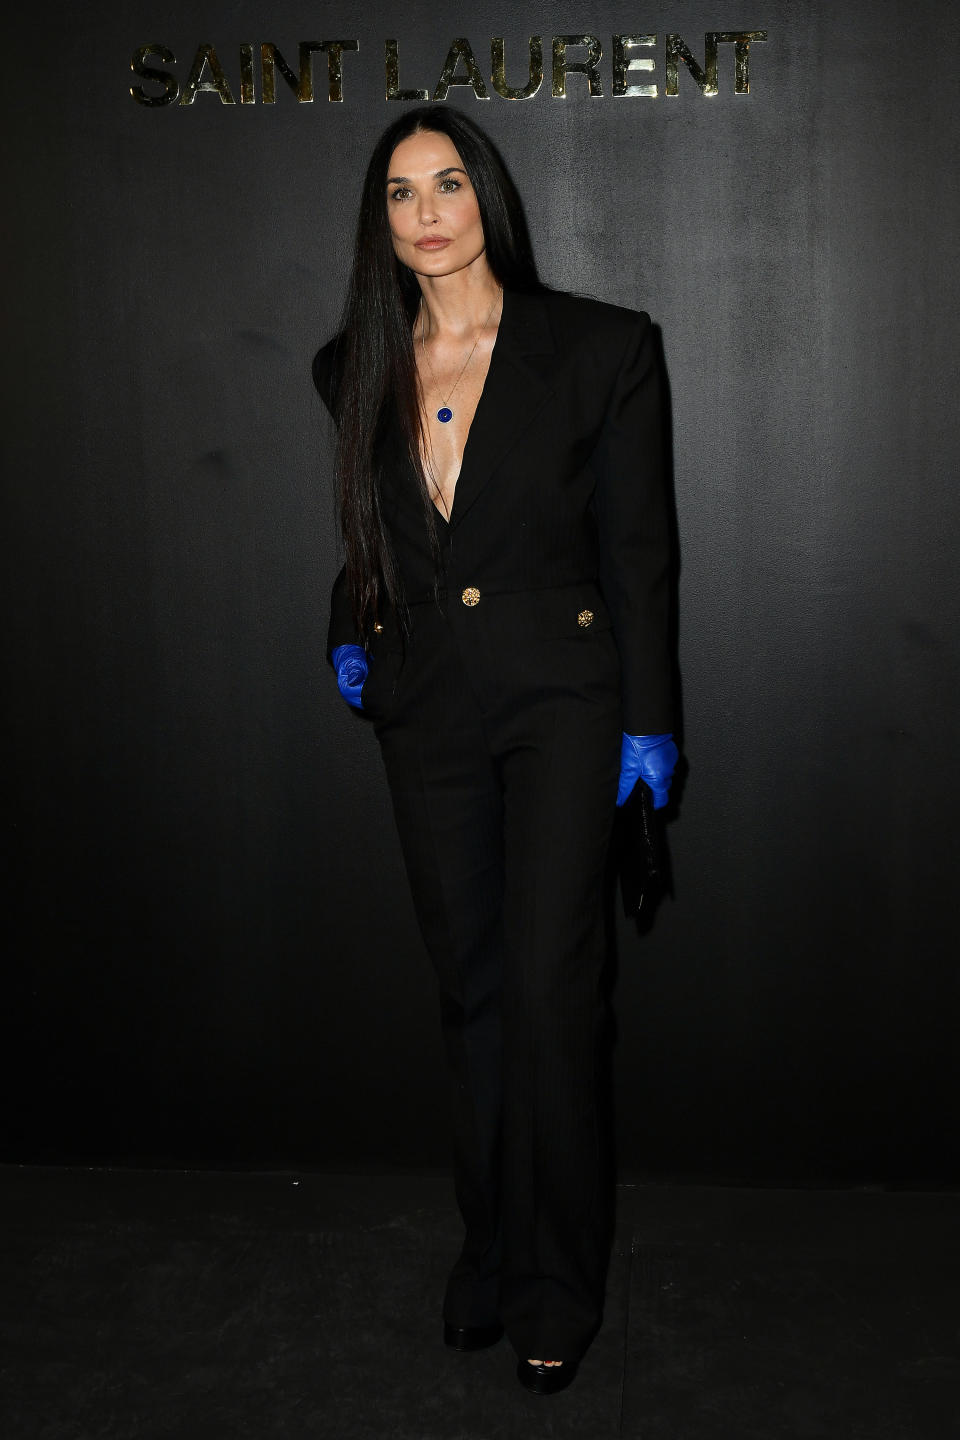 Demi Moore attends the Saint-Laurent Womenswear Fall/Winter 2022/2023. She wears a black suit with a plunging neckline and electric blue leather gloves.